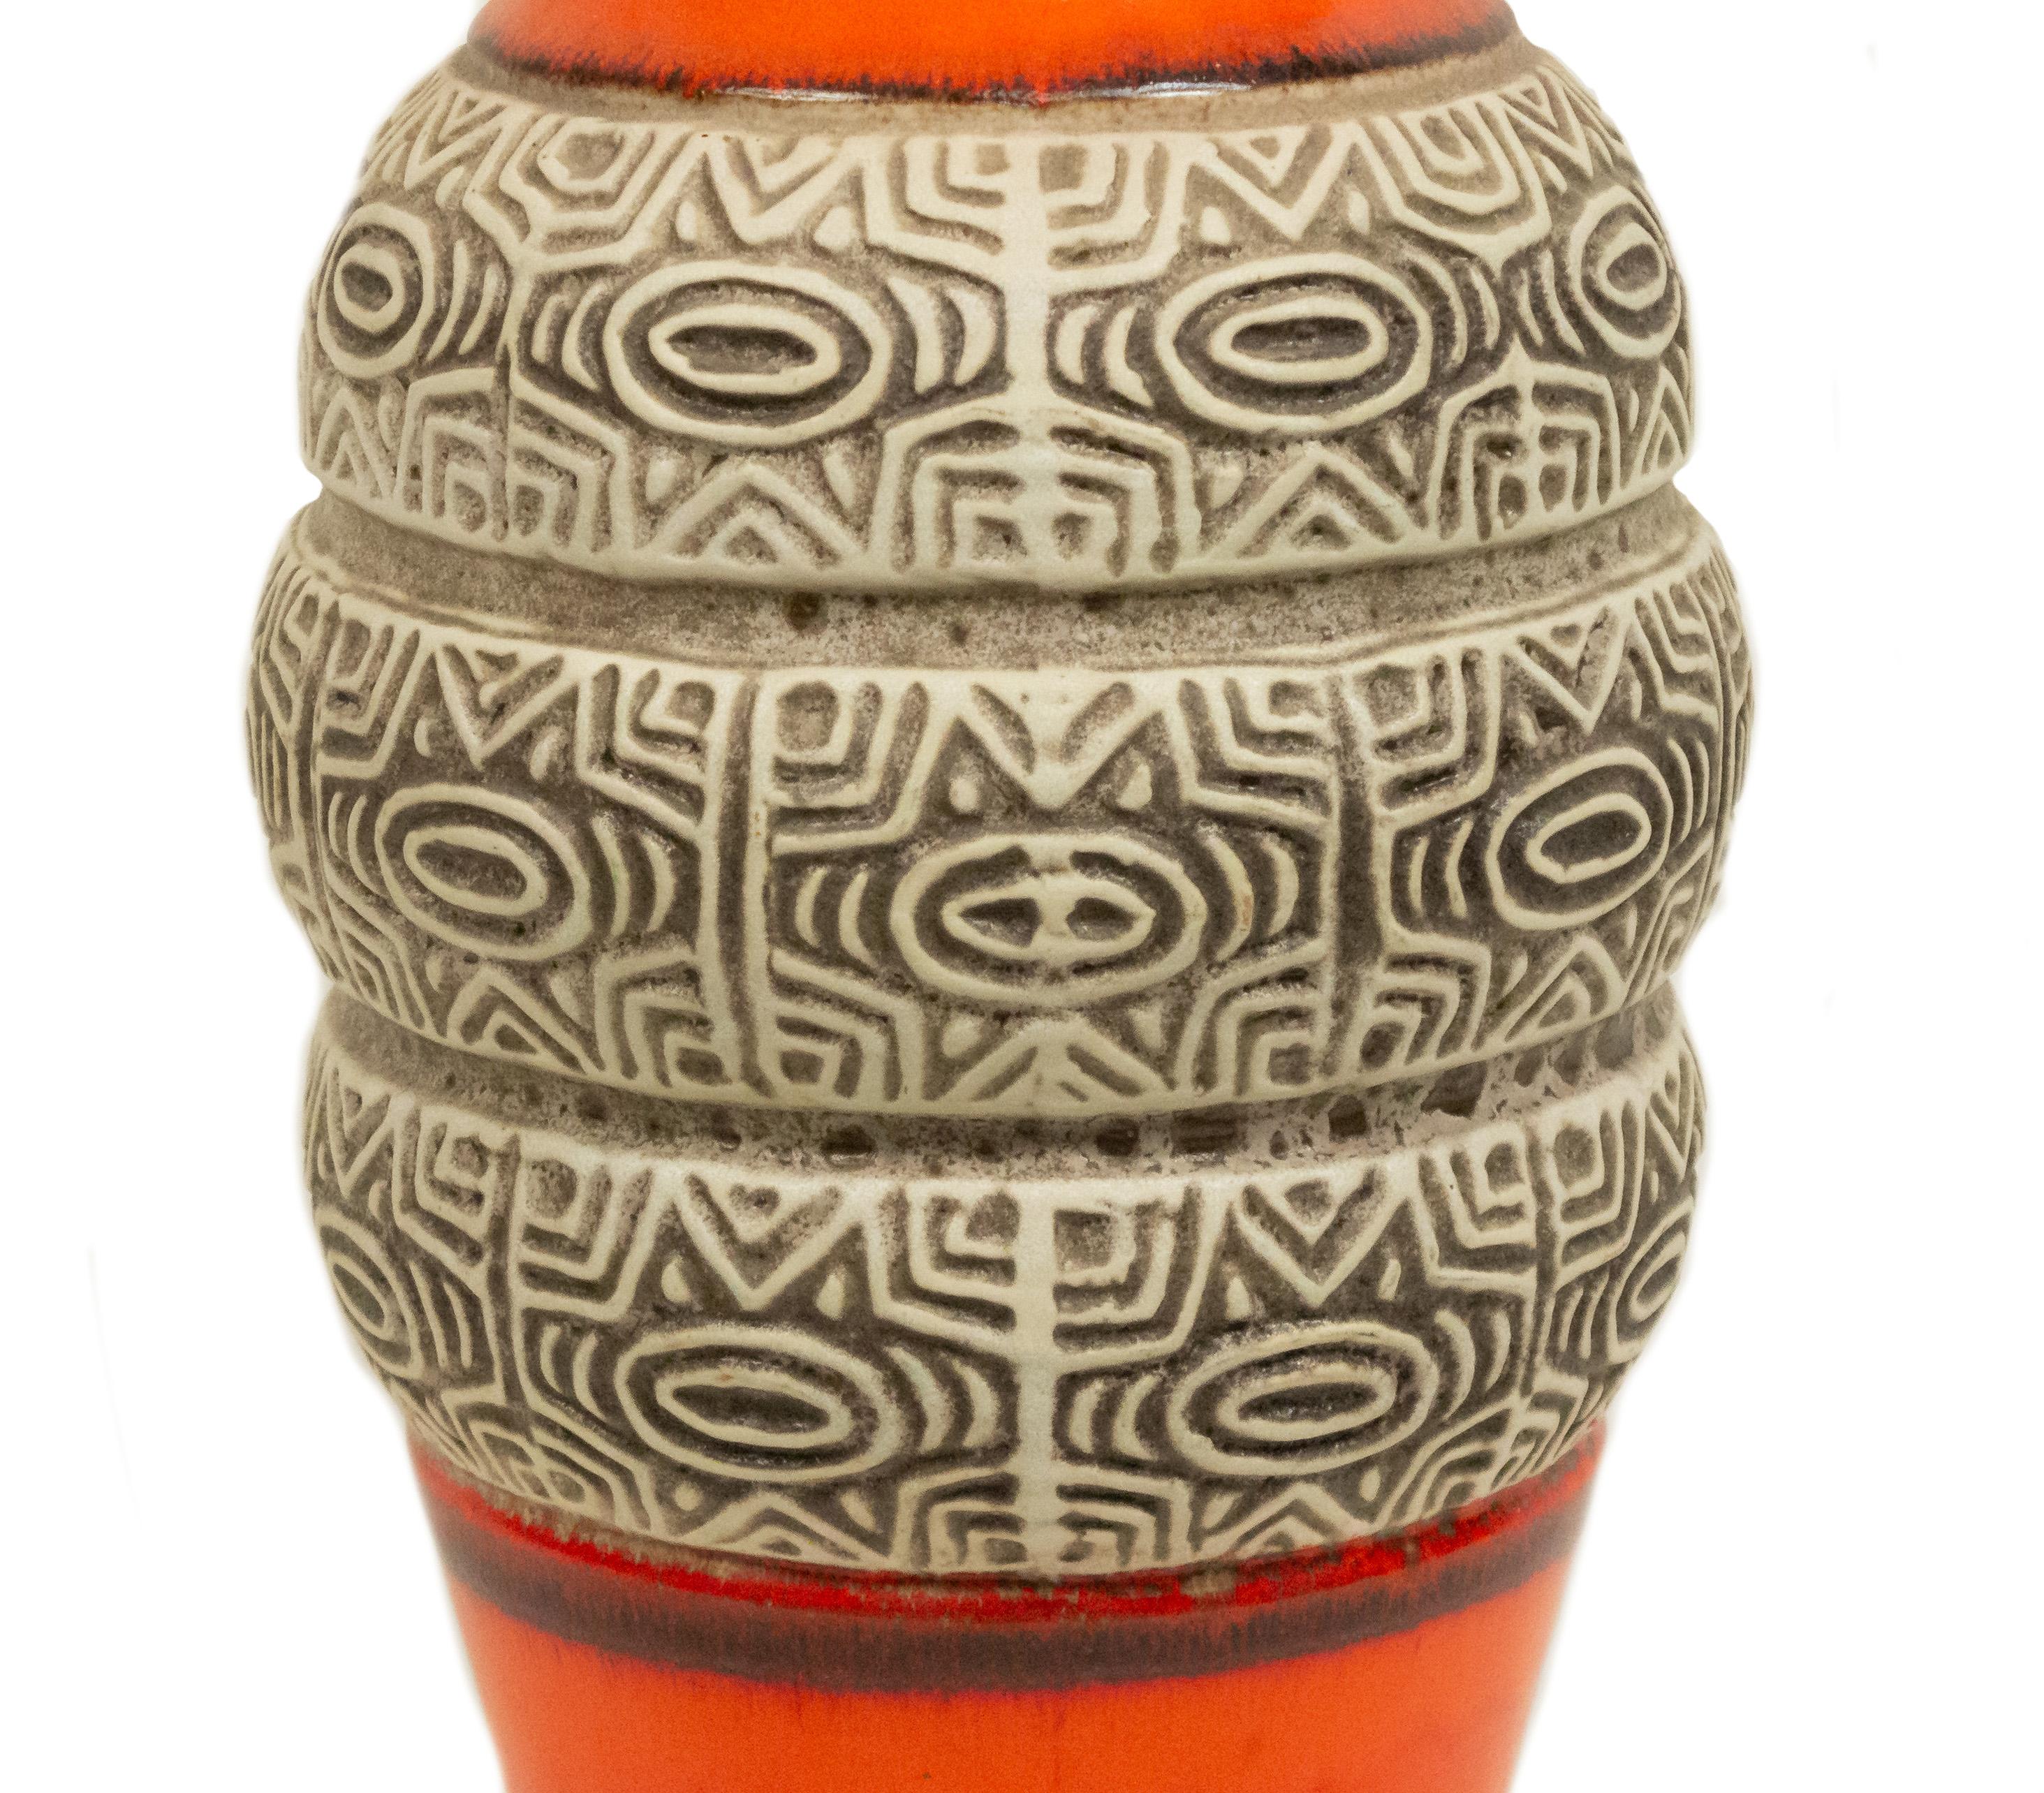 Post-War West Germany orange shaped cylindrical vase with incised beige ribbed & geometric banded middle section (Original label attached vú KERAMIK).
     